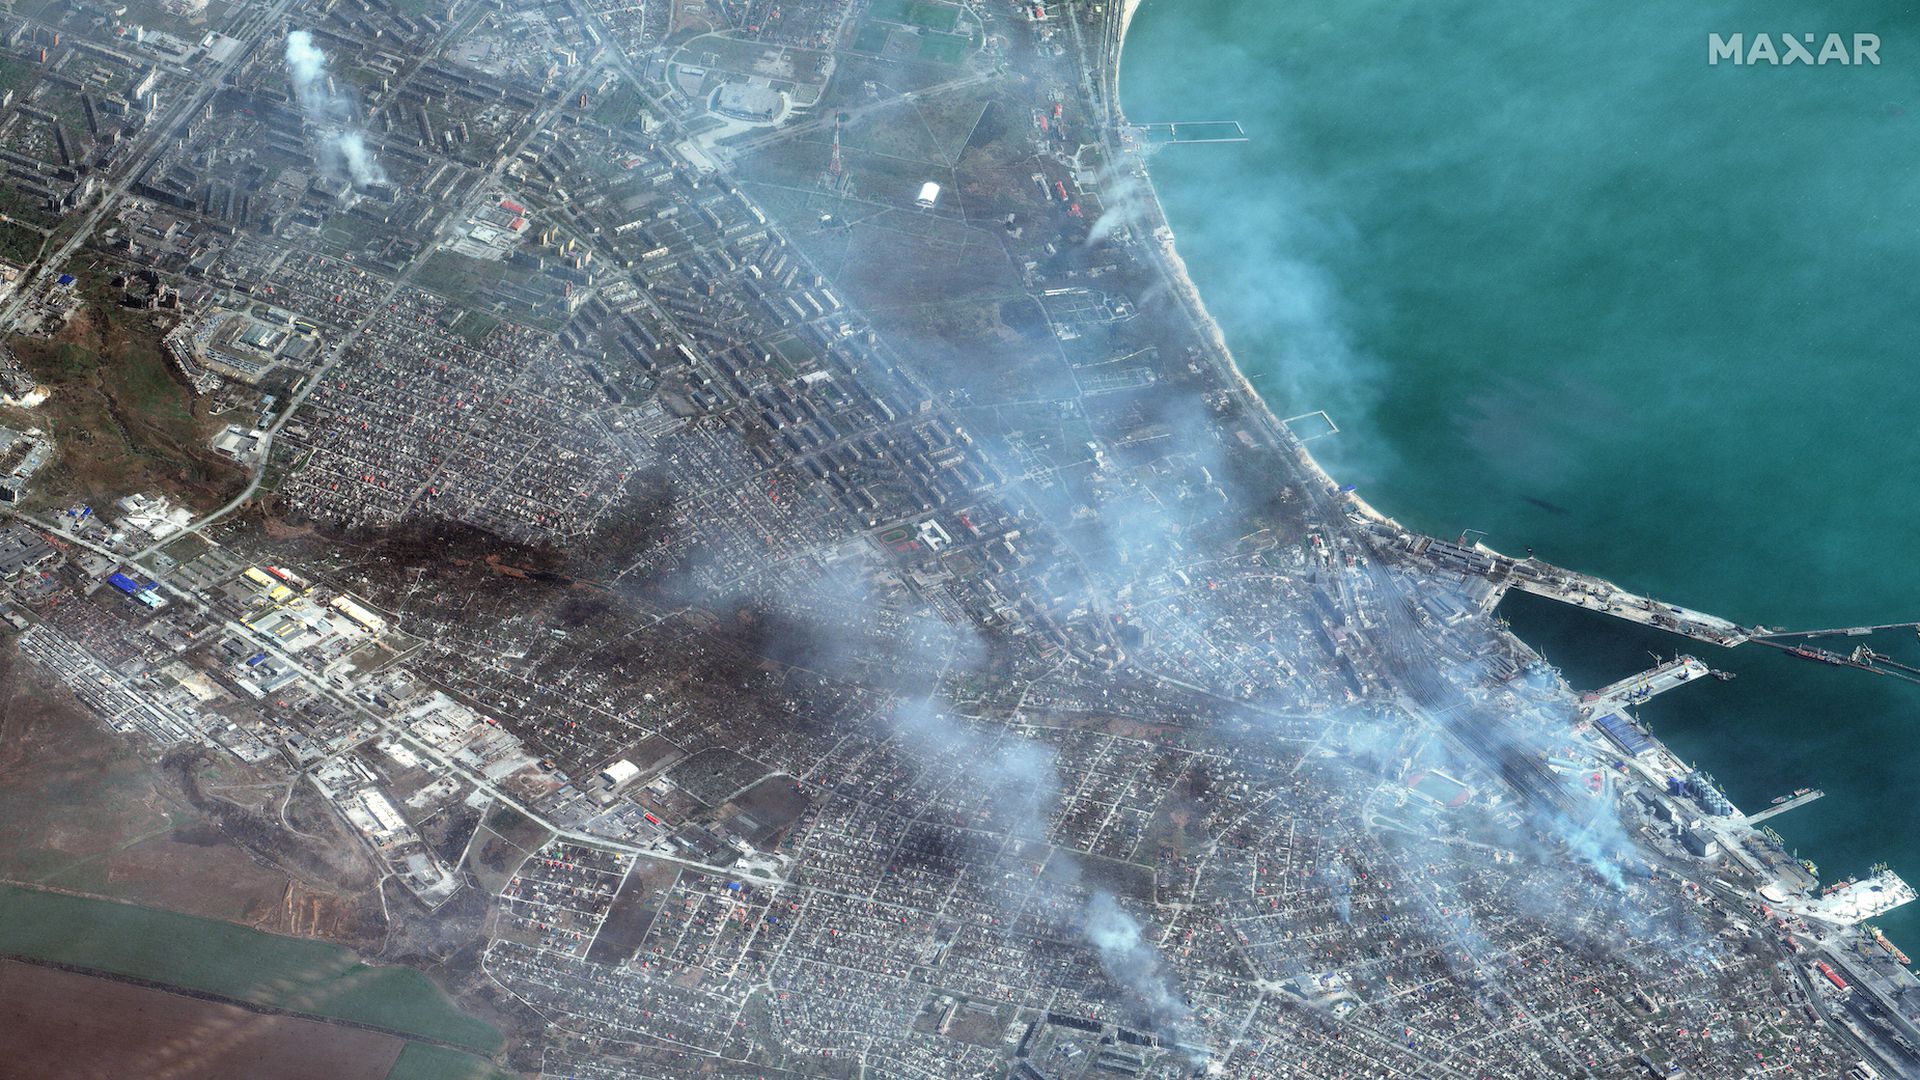 Maxar satellite imagery of buildings on fire in western Mariupol, Ukraine on April 9, 2022.